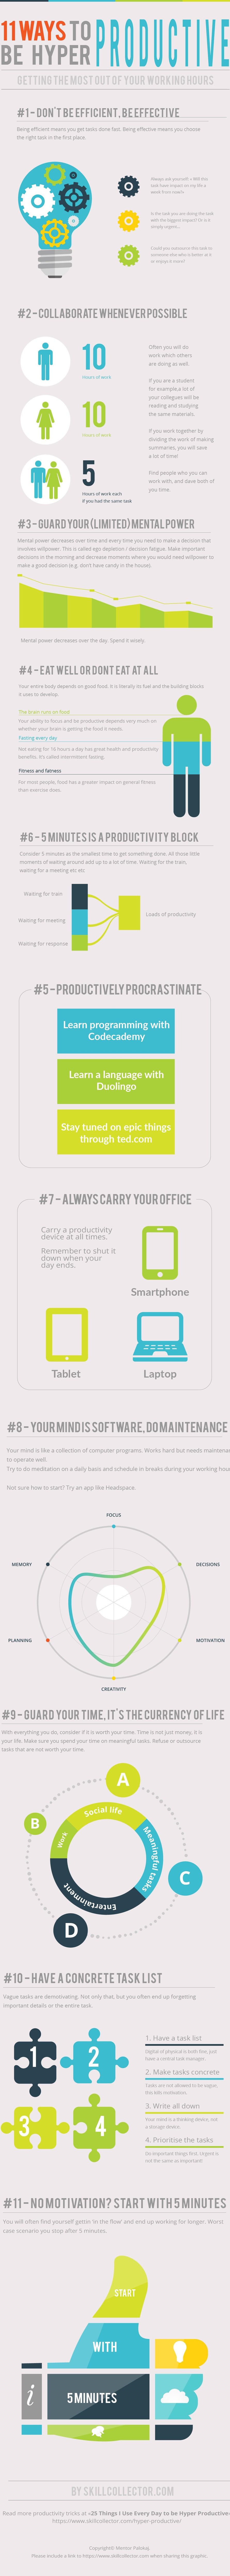 Productivity-infographic-mobile